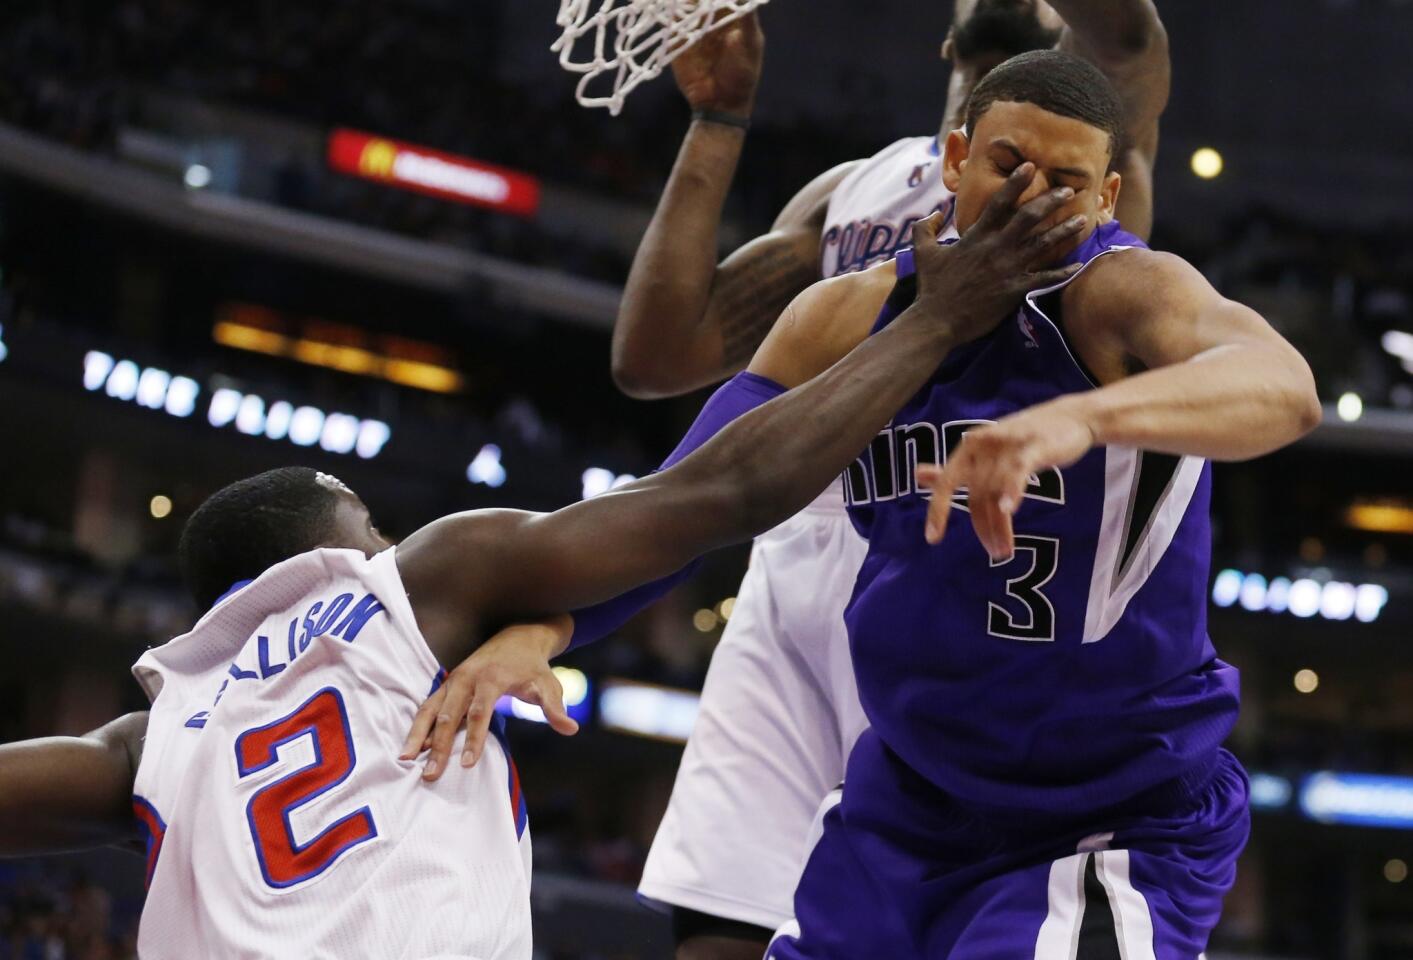 Clippers guard Darren Collison hits Kings guard Ray McCallum in the face while battling for a loose ball in the second half.